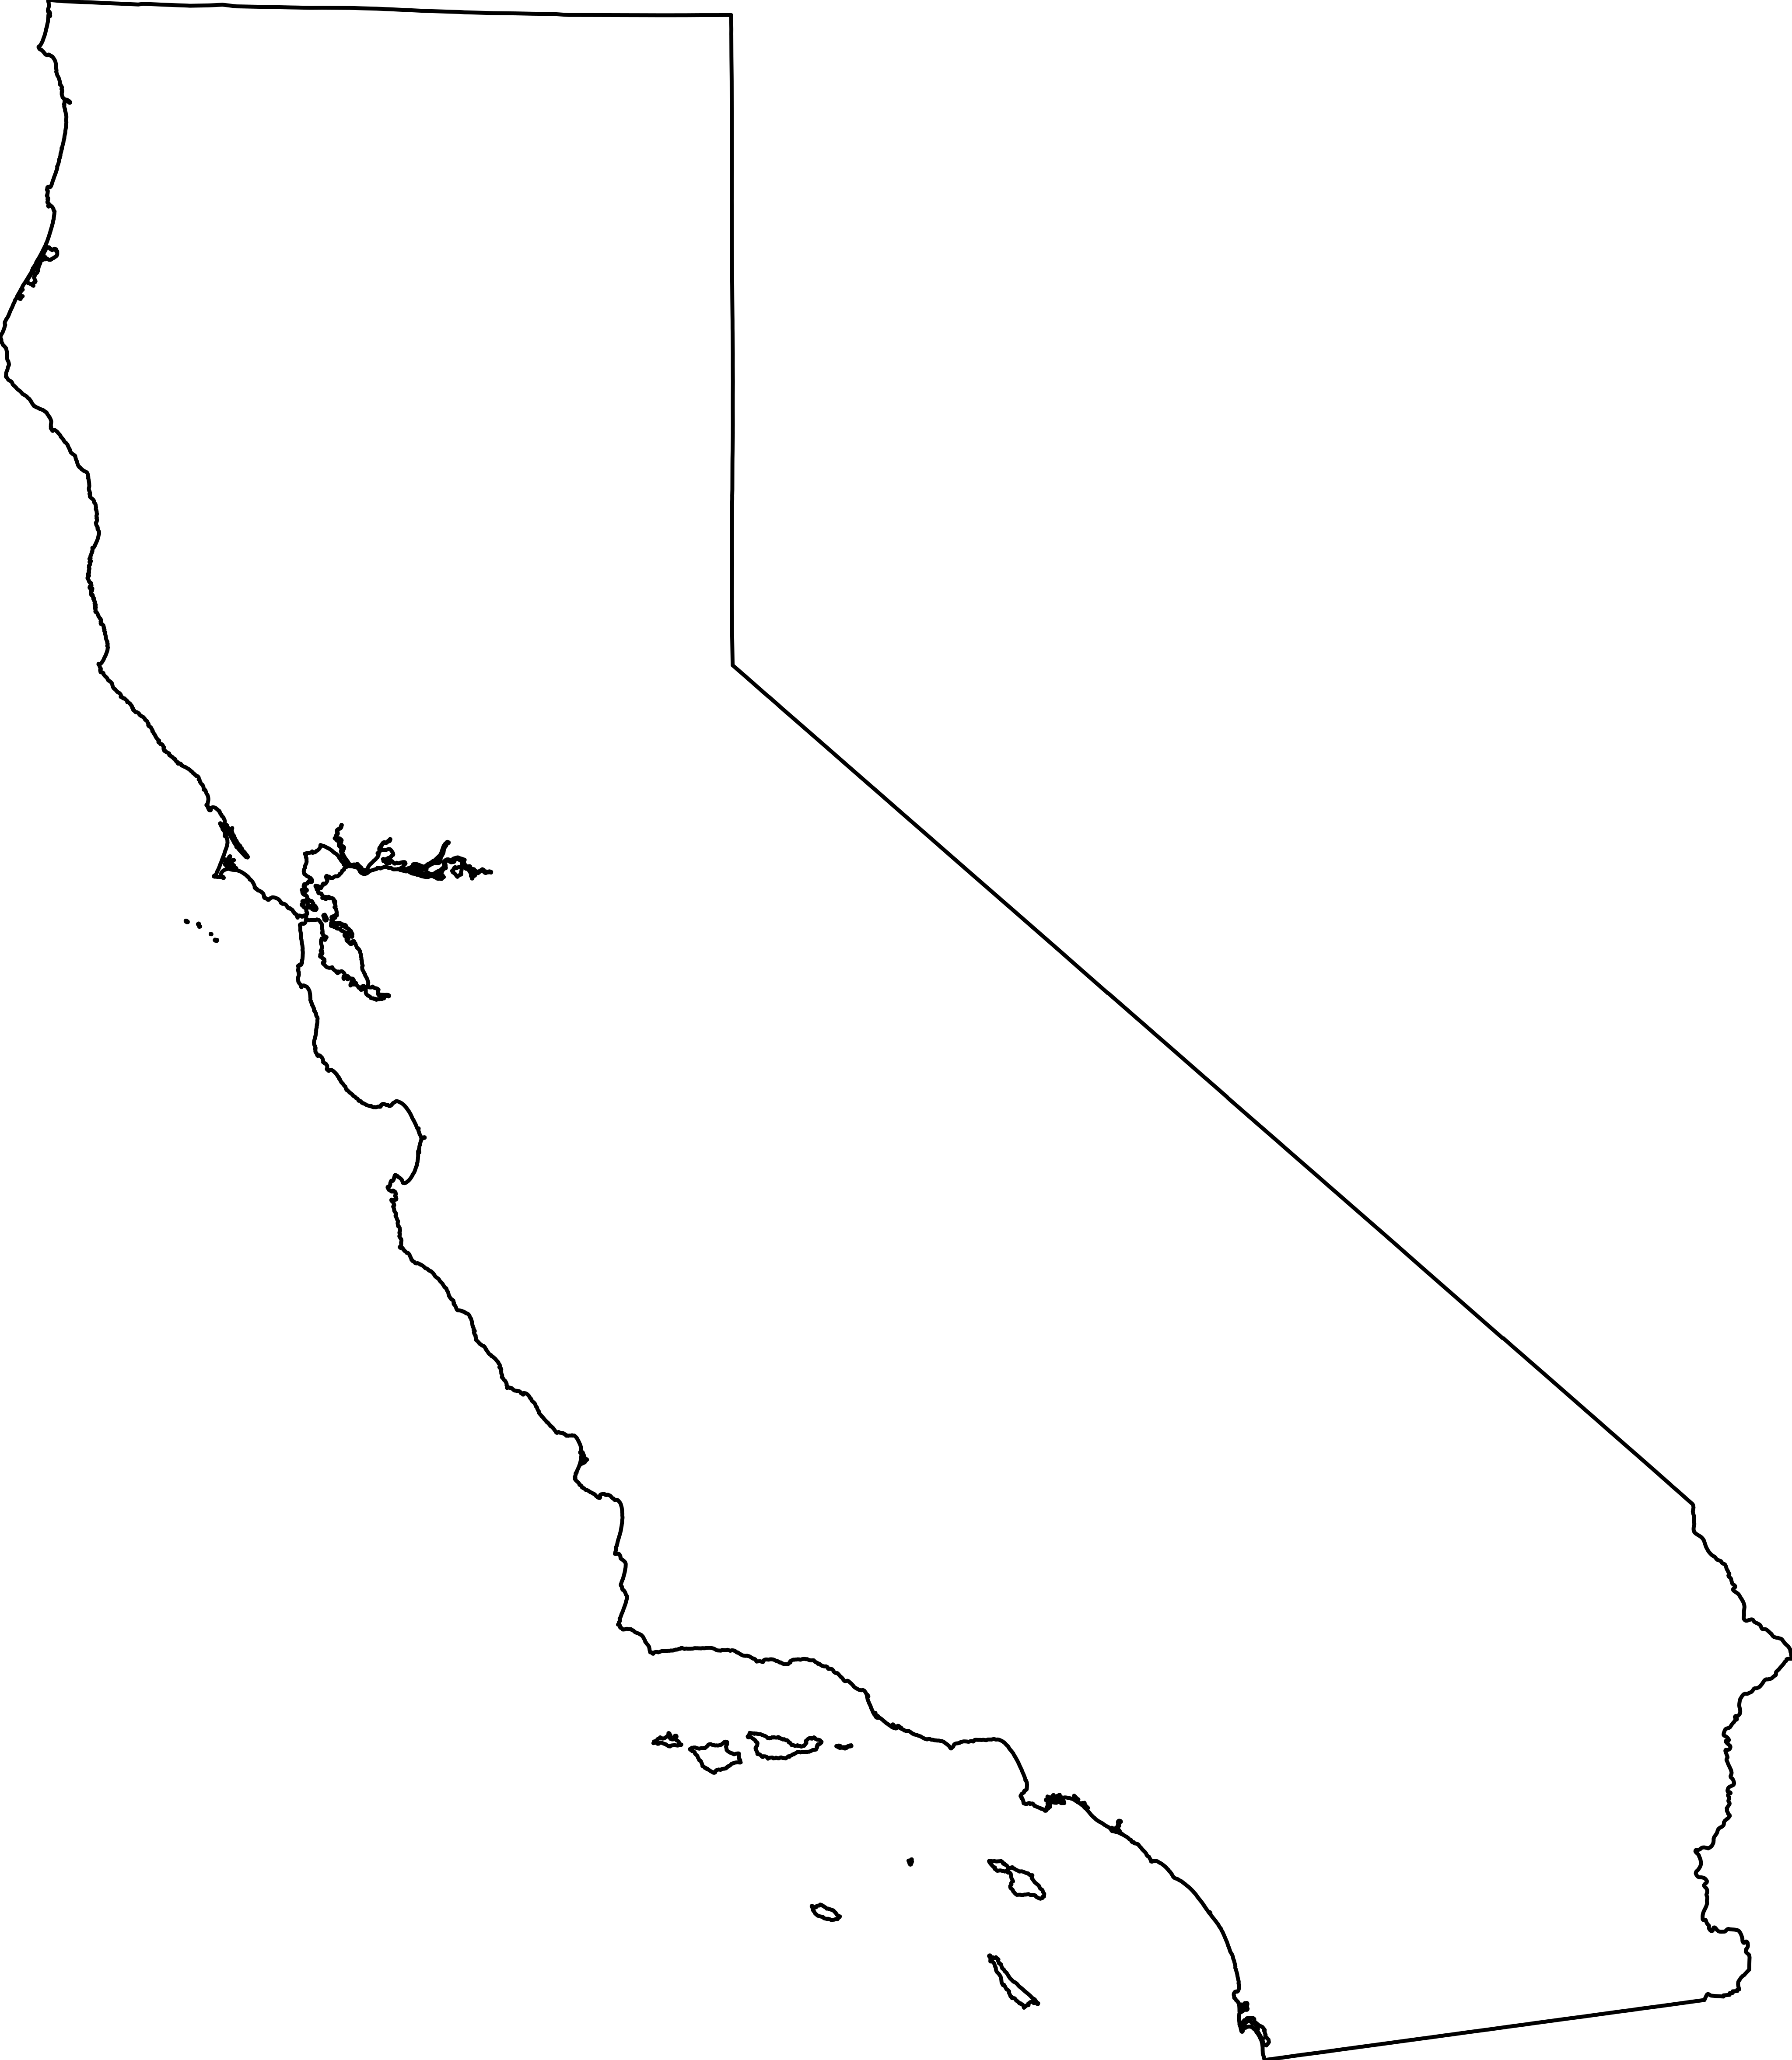 California state map with a blank LLC form